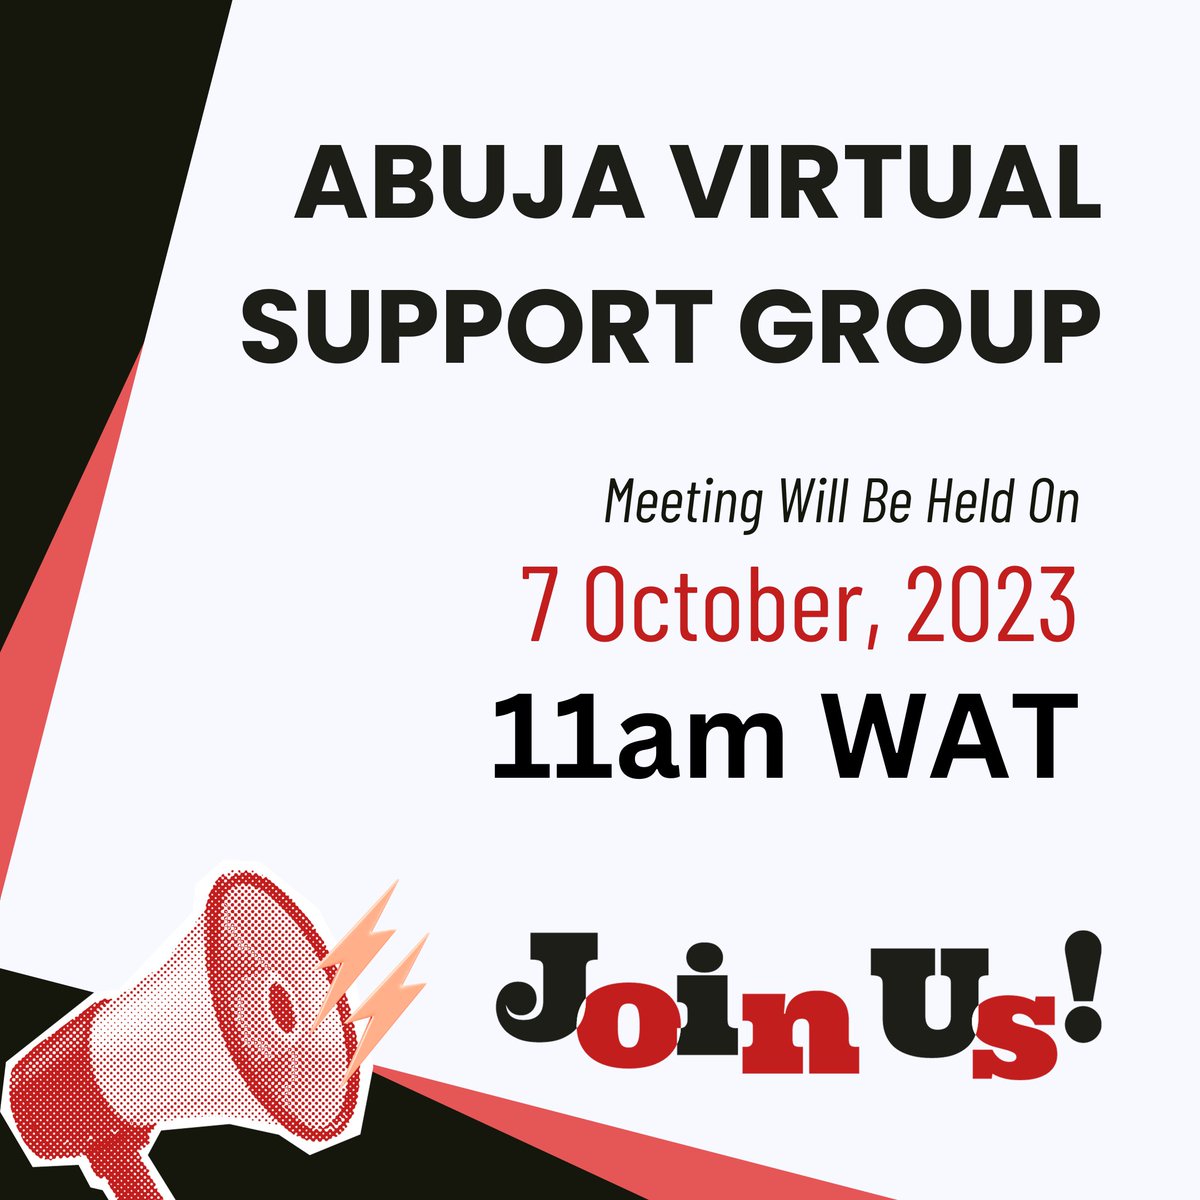 Join Abuja virtual support group meeting this Saturday, October 7, 2023, at 11 a.m. WAT. During the meeting, Dr. U.A.C. Okafor, an Associate Professor of Physiotherapy at Lagos University Teaching Hospital (LUTH), will speak on Physiotherapy and Parkinson's. See you there!